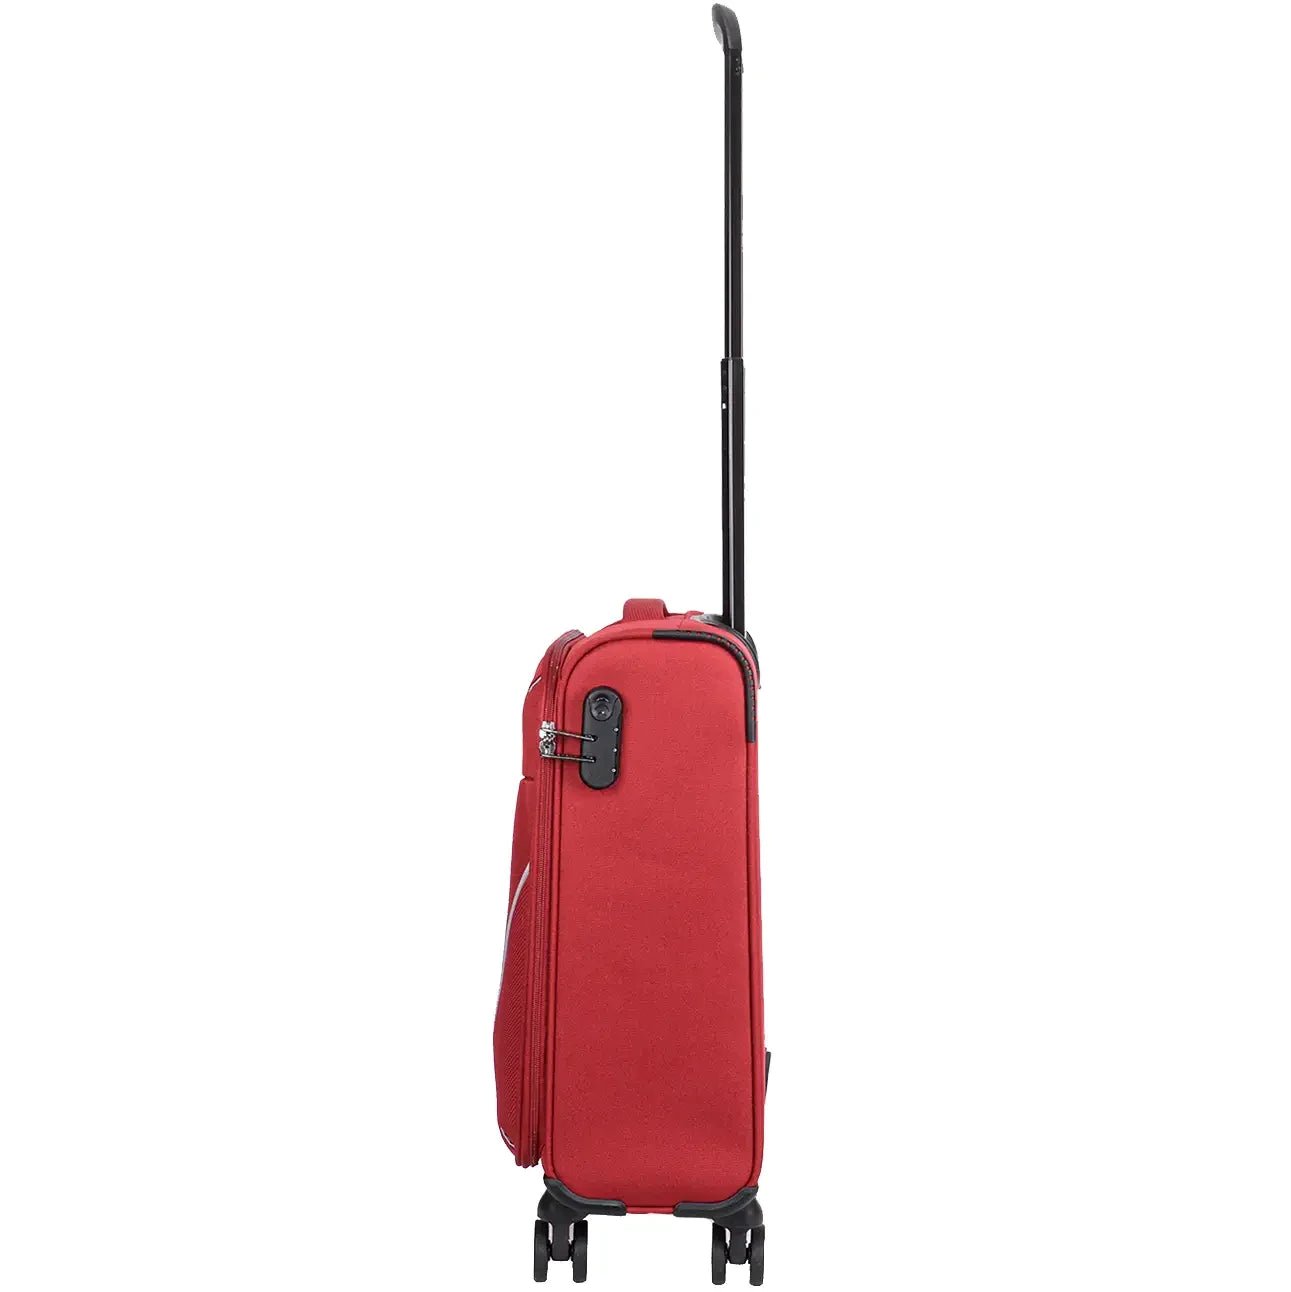 Valise cabine 4 roues Stratic Strong 55 cm - marine